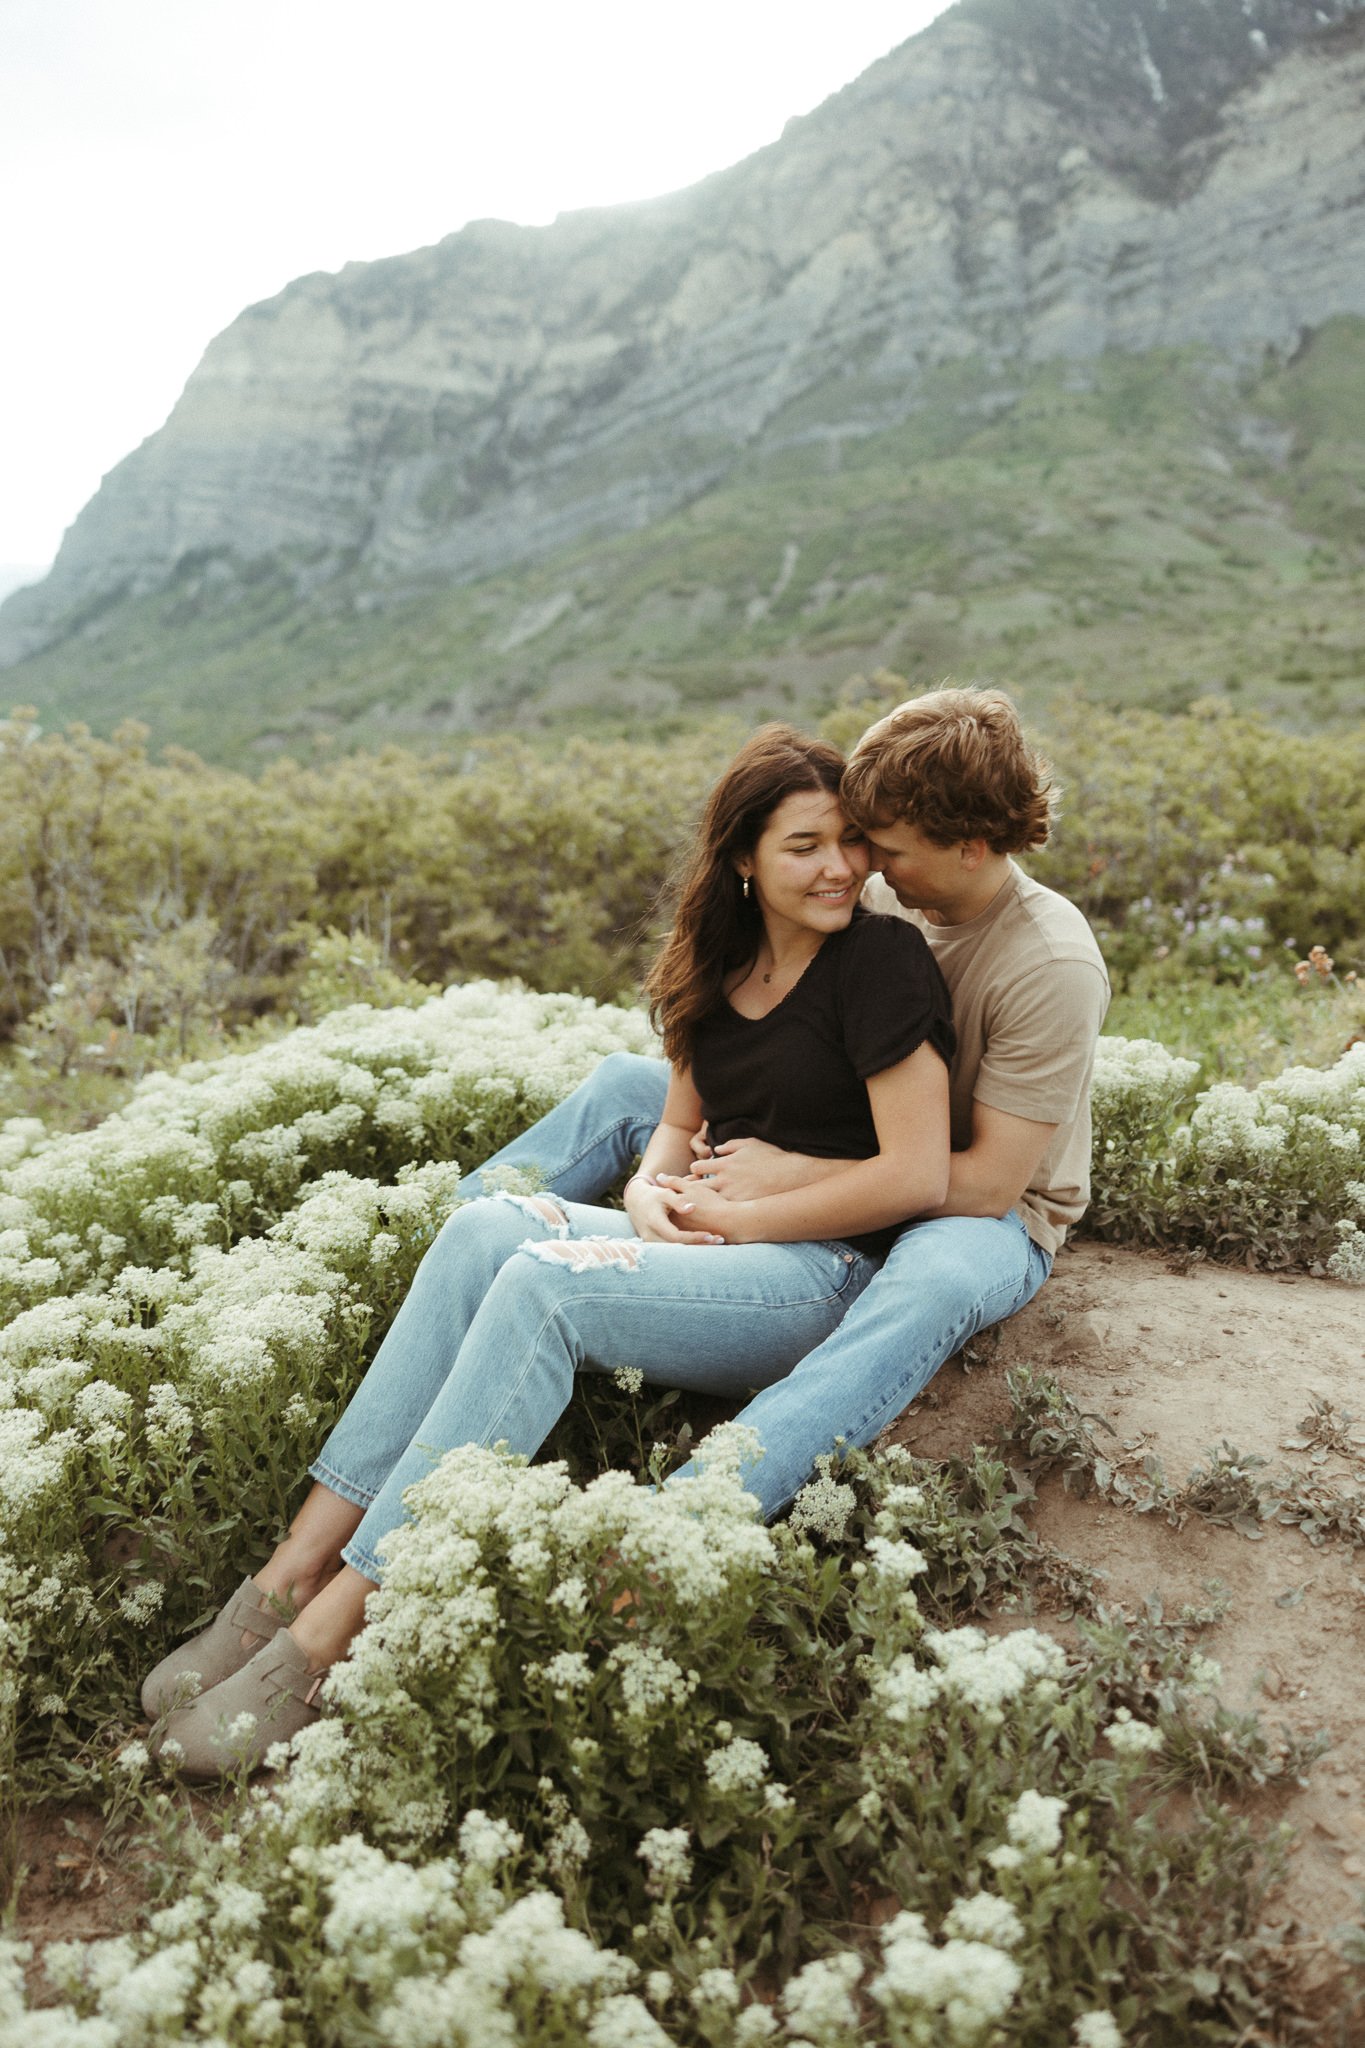 Spring-Provo-Canyon-Wildflowers-Engagement-Session-72